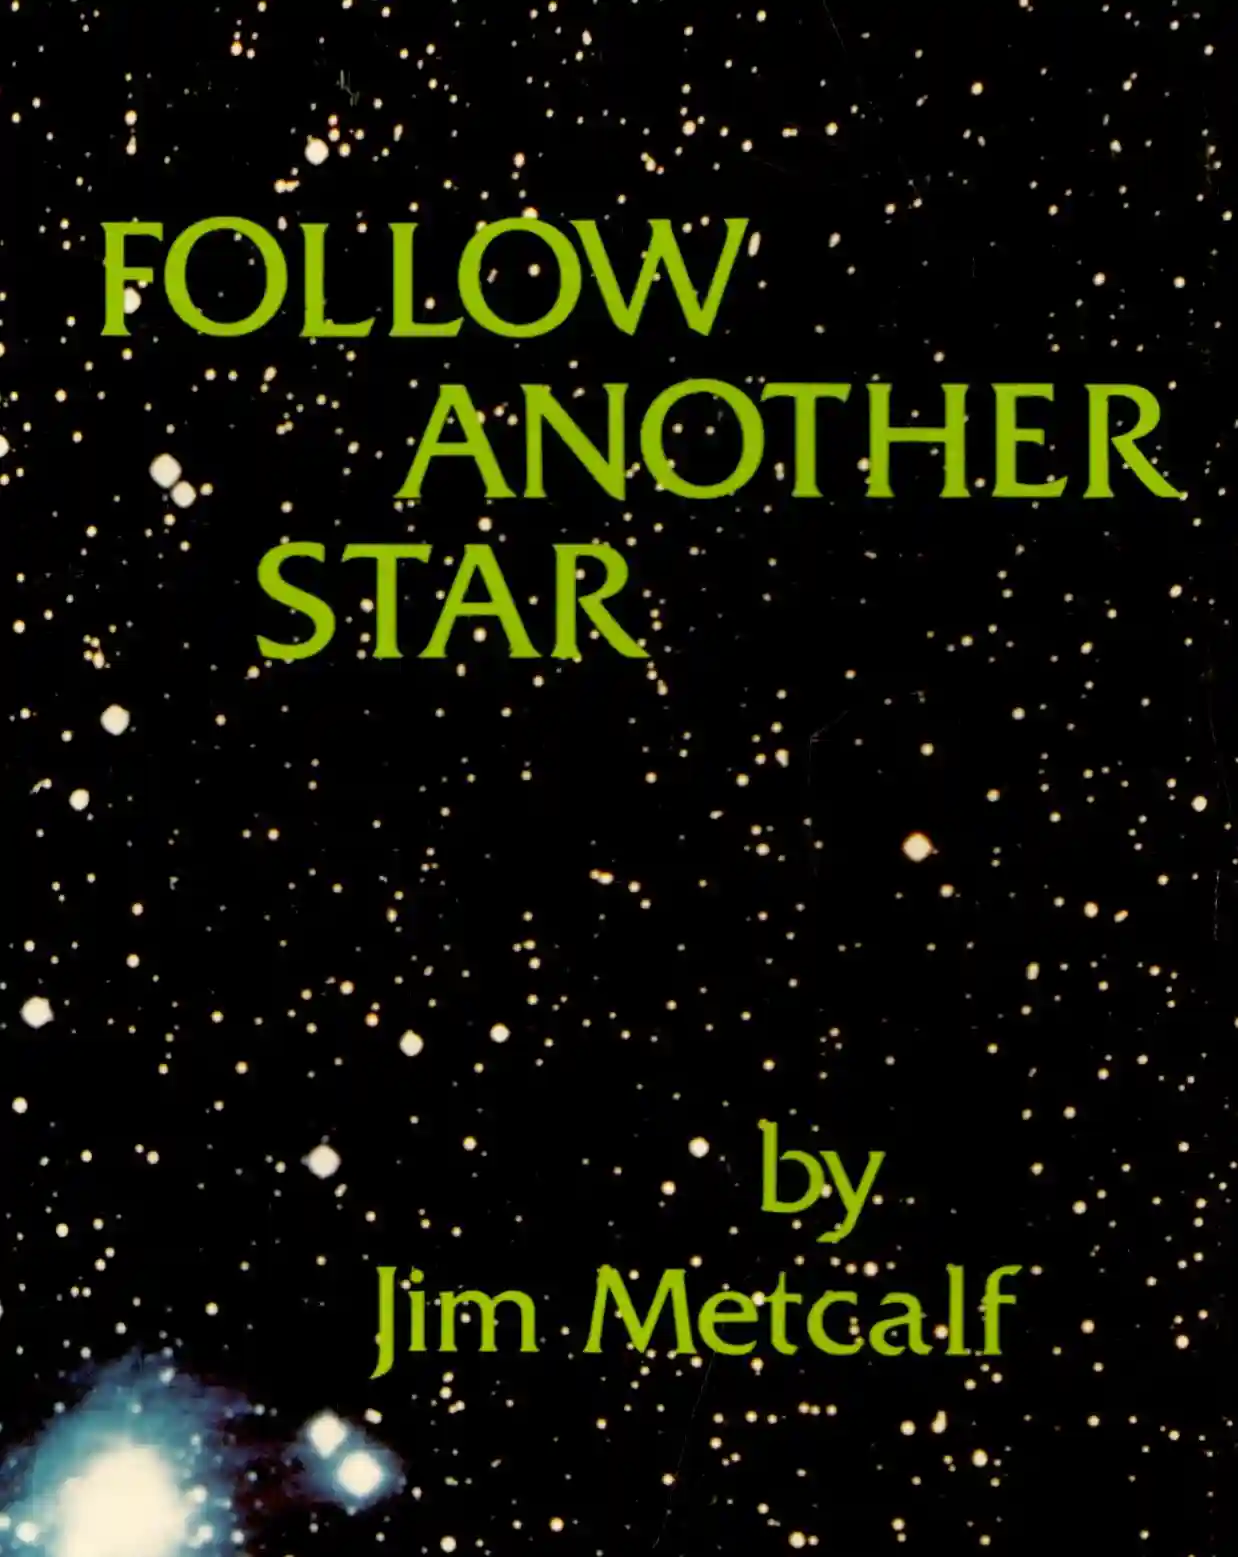 The front jacket cover of Jim's fourth book, 'Follow Another Star', published posthumously. The front cover shows a textured, cloudy sunset, rich with oranges and purples. The sky is supported by an obscured earth that gently slopes upward on the left side and is populated by a few scruffy trees on the right. Little else is visible, leaving the brilliance of the heavens to speak. The title is featured at the top, in the same font with very slight serifs and close kerning. The full title is capitalized, while Jim's name at the bottom is in normal casing.